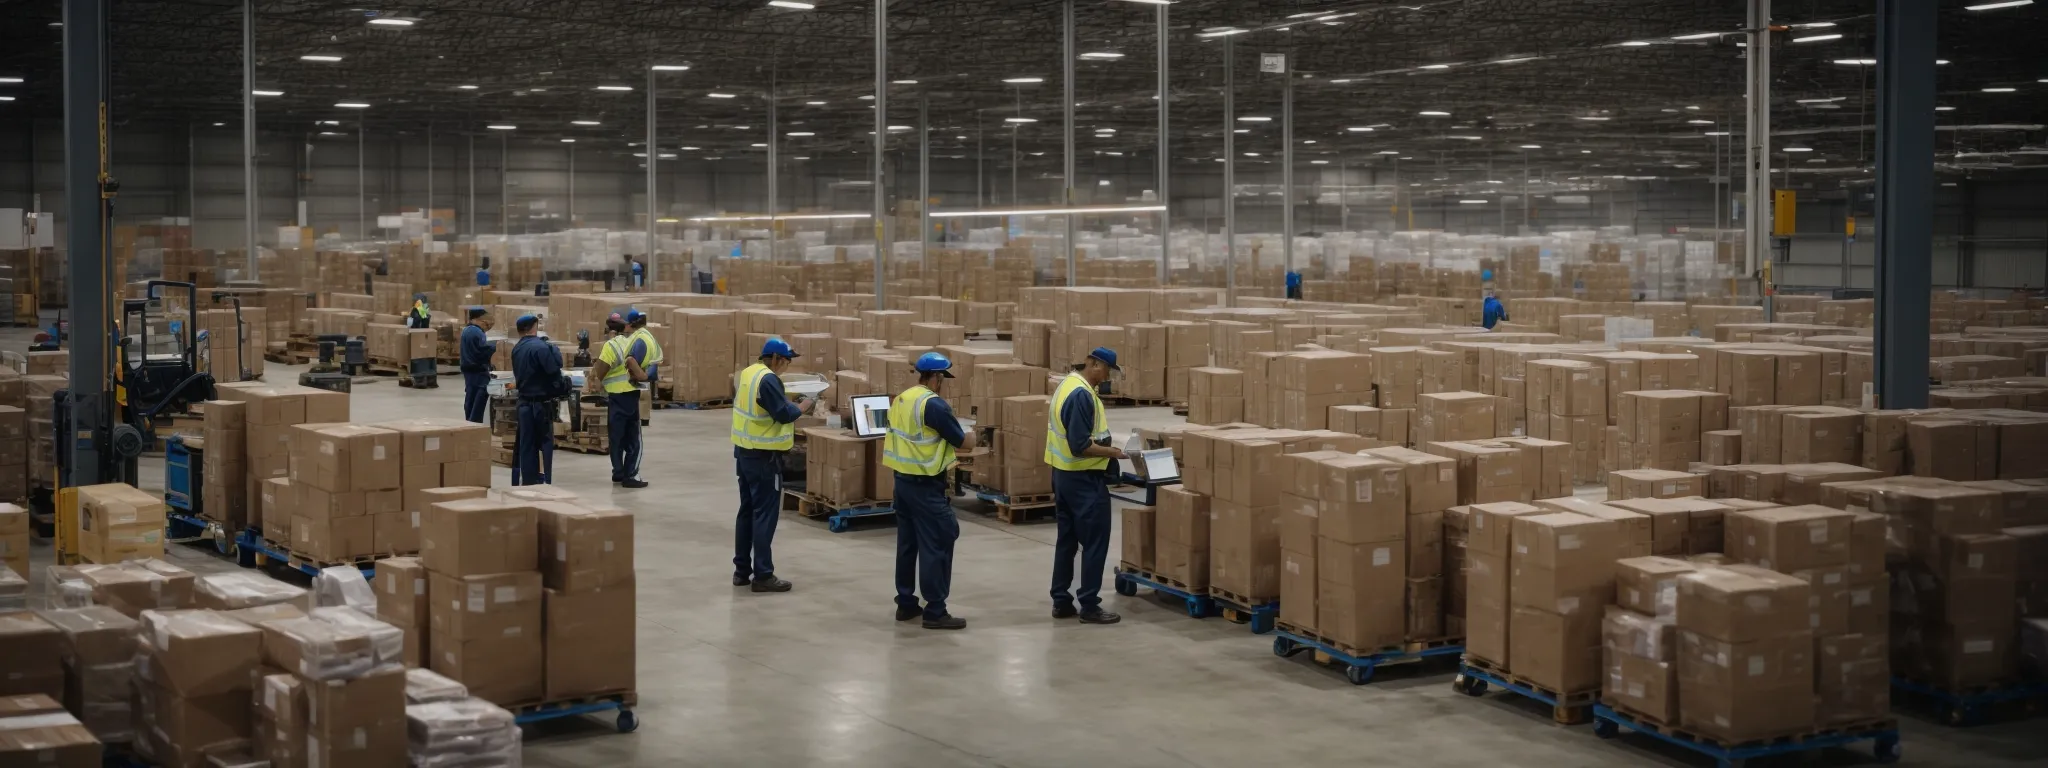 a bustling warehouse with workers scanning barcodes on boxes to update an online inventory system.